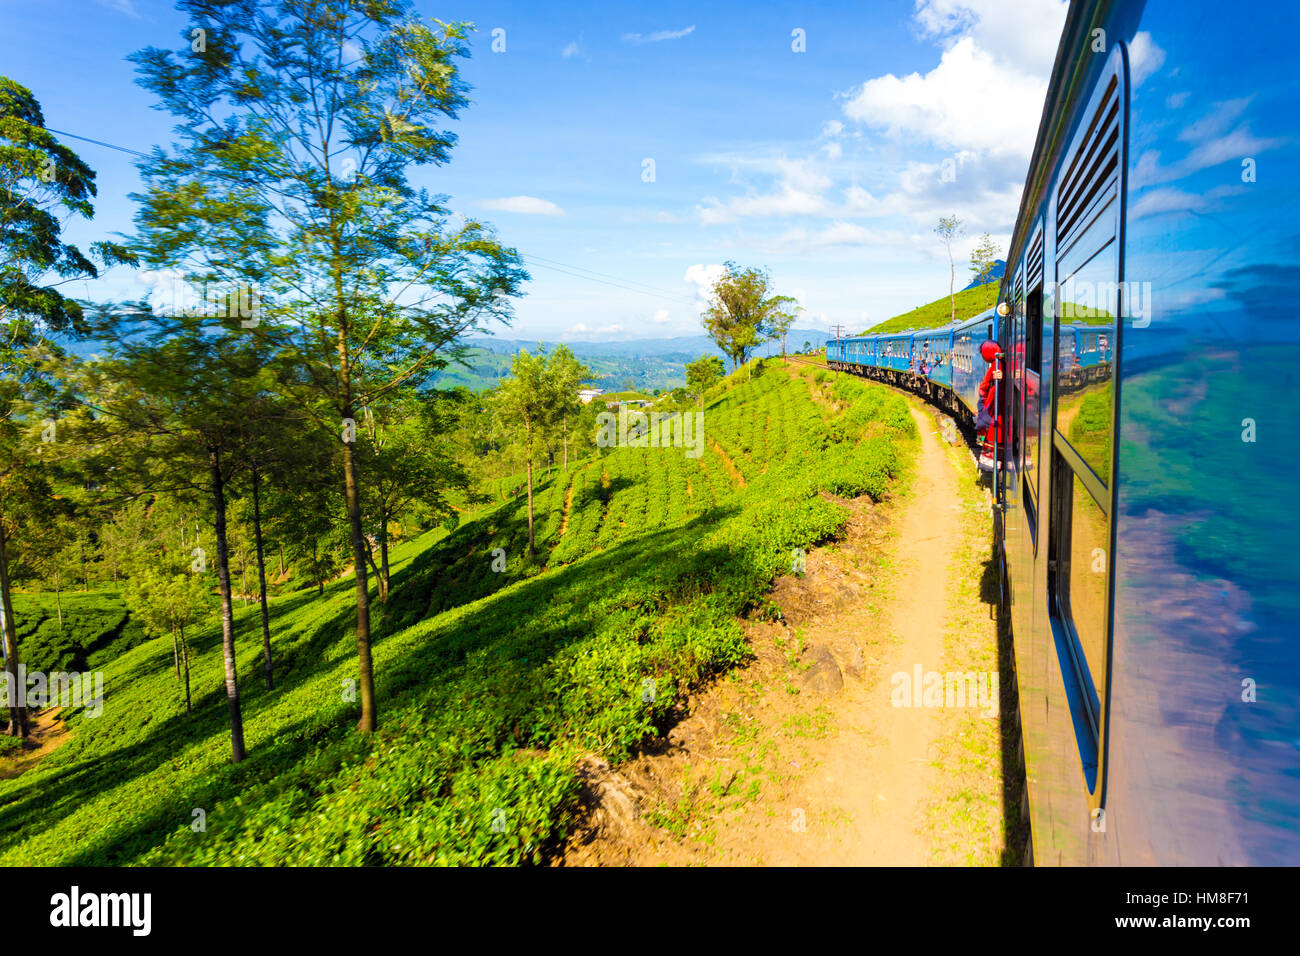 Tea plantation view and neat green tea plants seen from side exterior of passenger train curving ahead in highlands of Sri Lanka Stock Photo